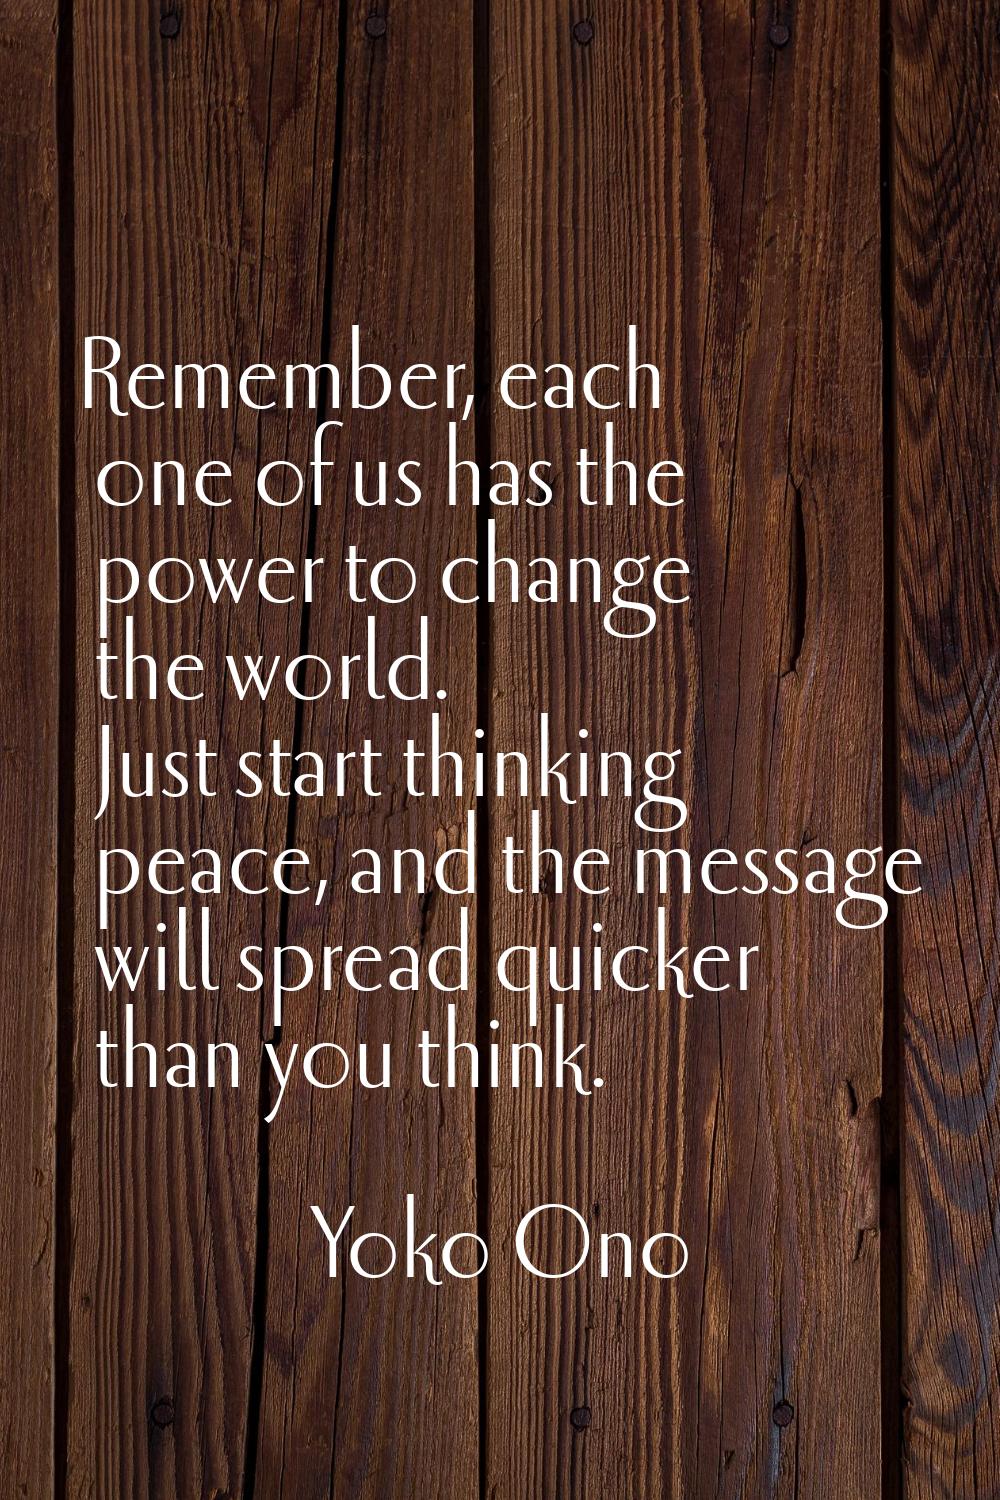 Remember, each one of us has the power to change the world. Just start thinking peace, and the mess